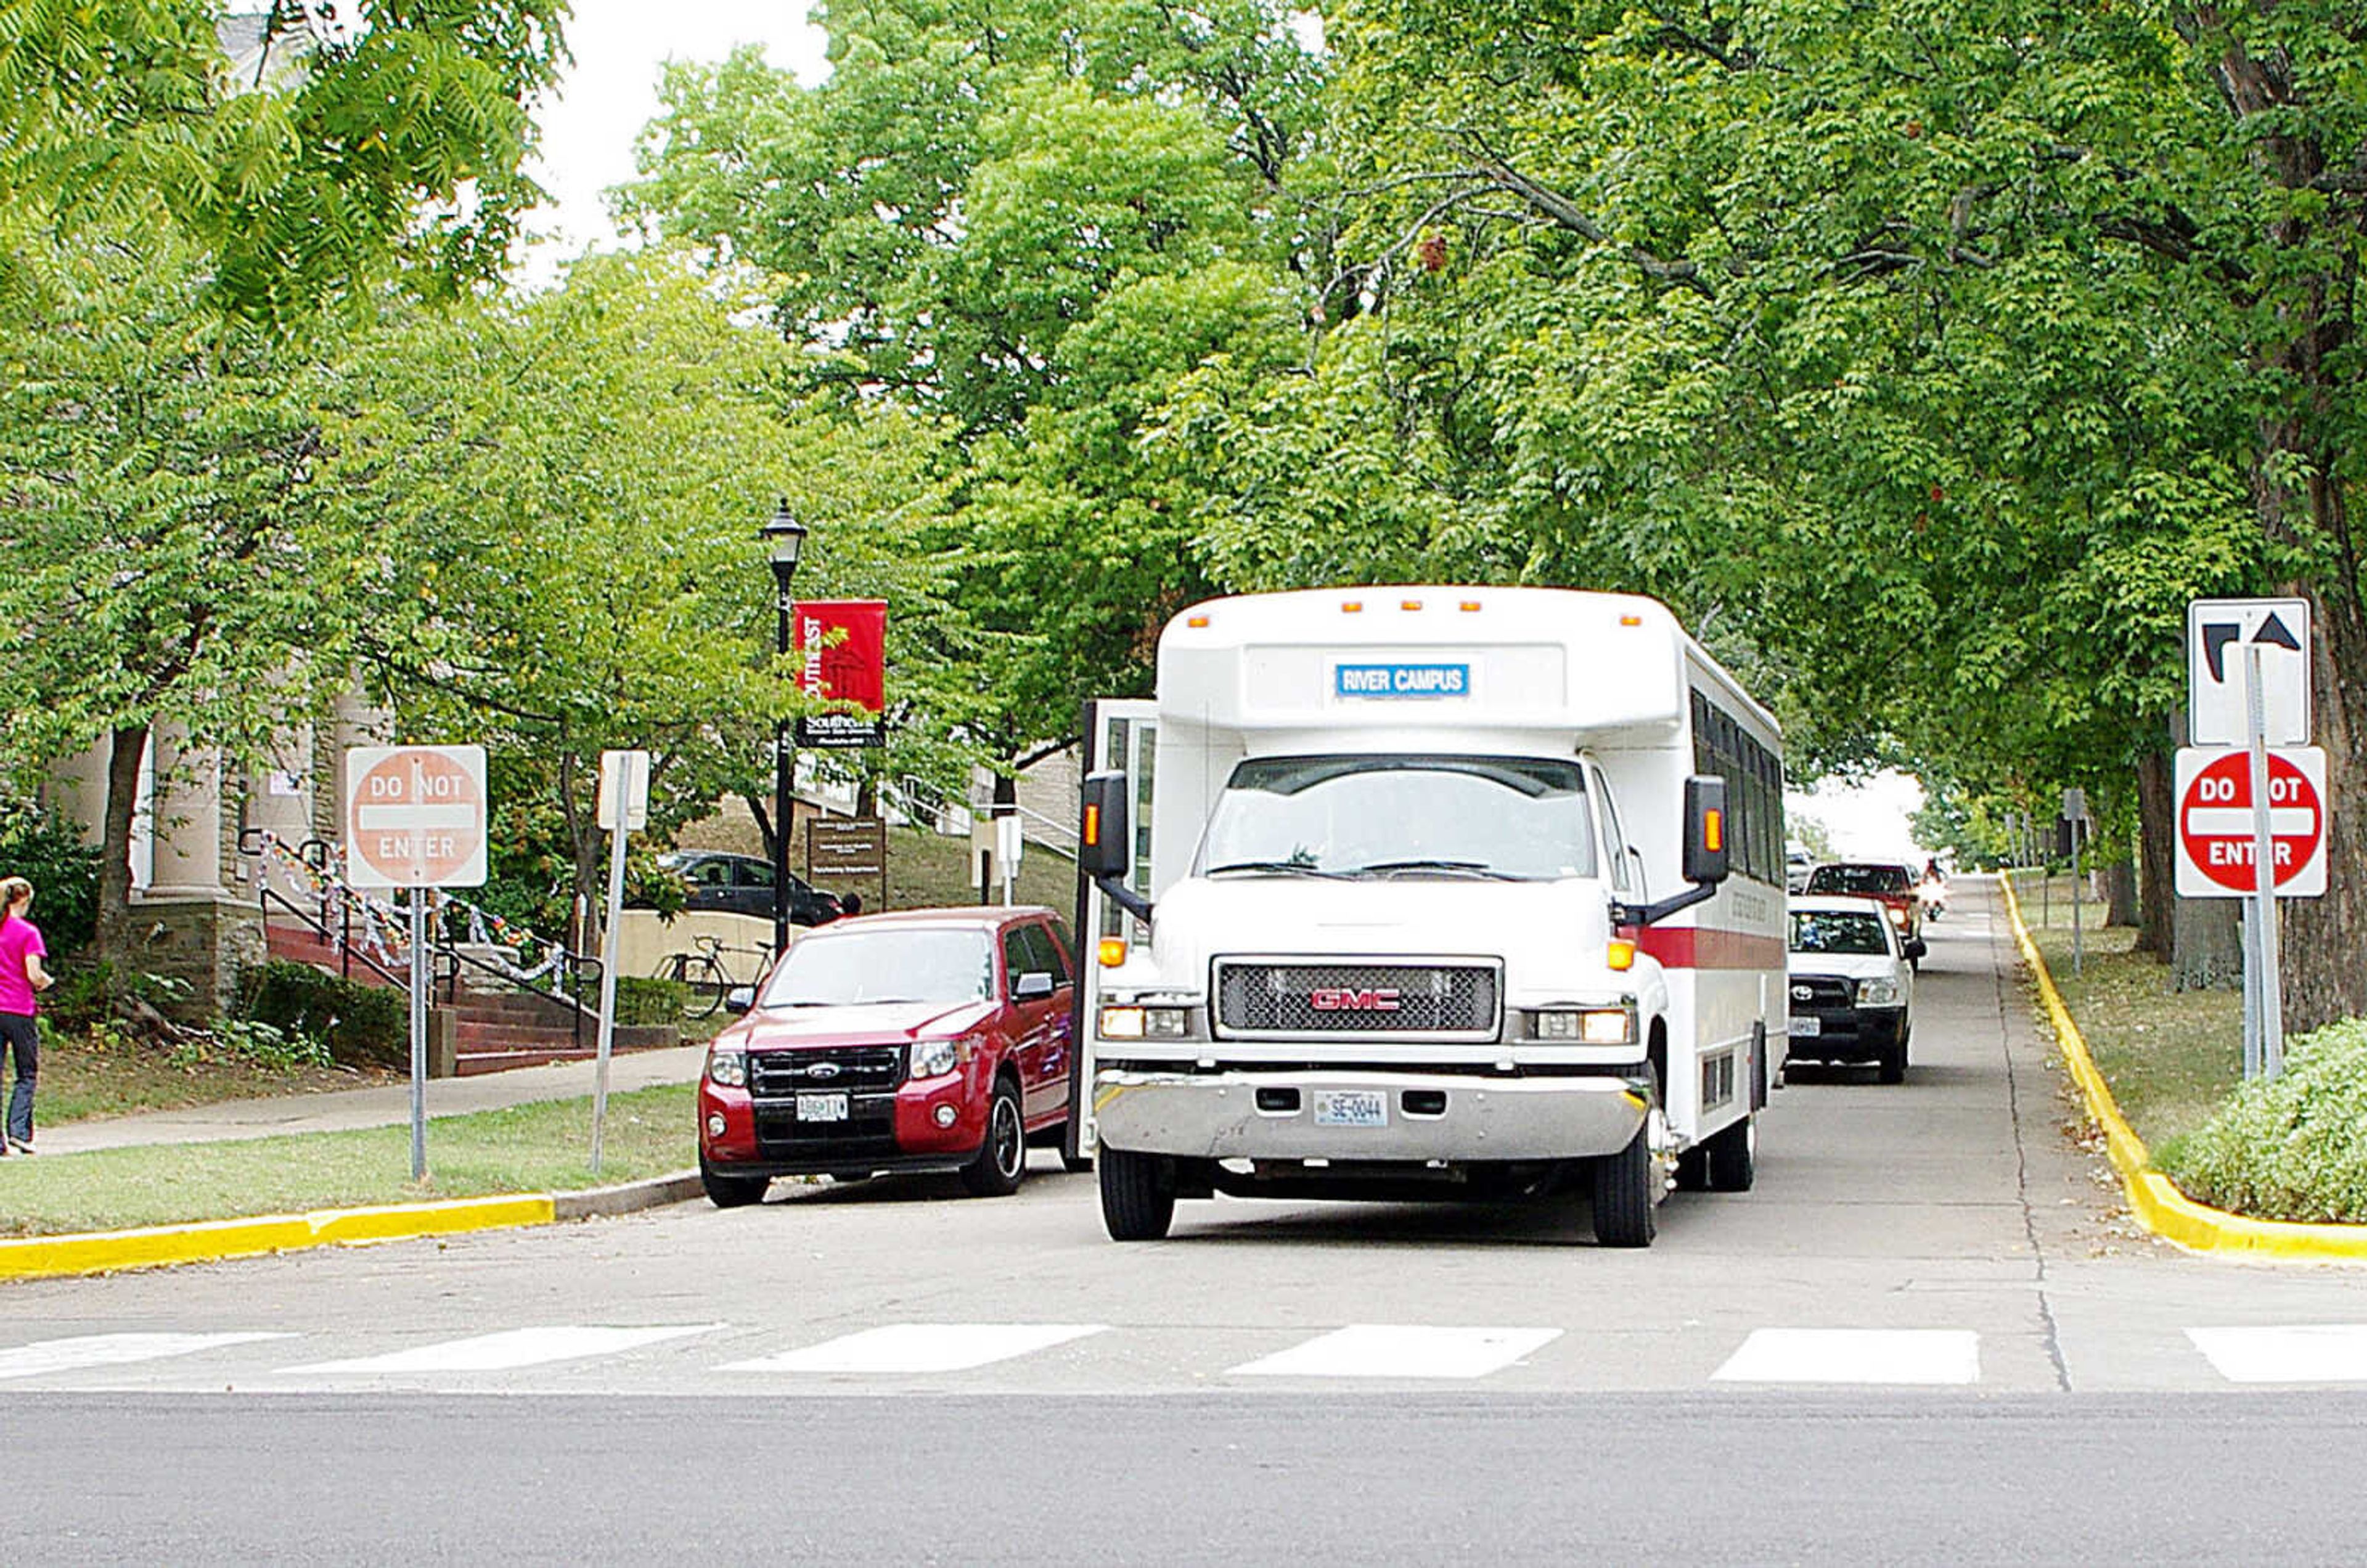 the river campus shuttle coming towards the Normal and N. Pacific intersection